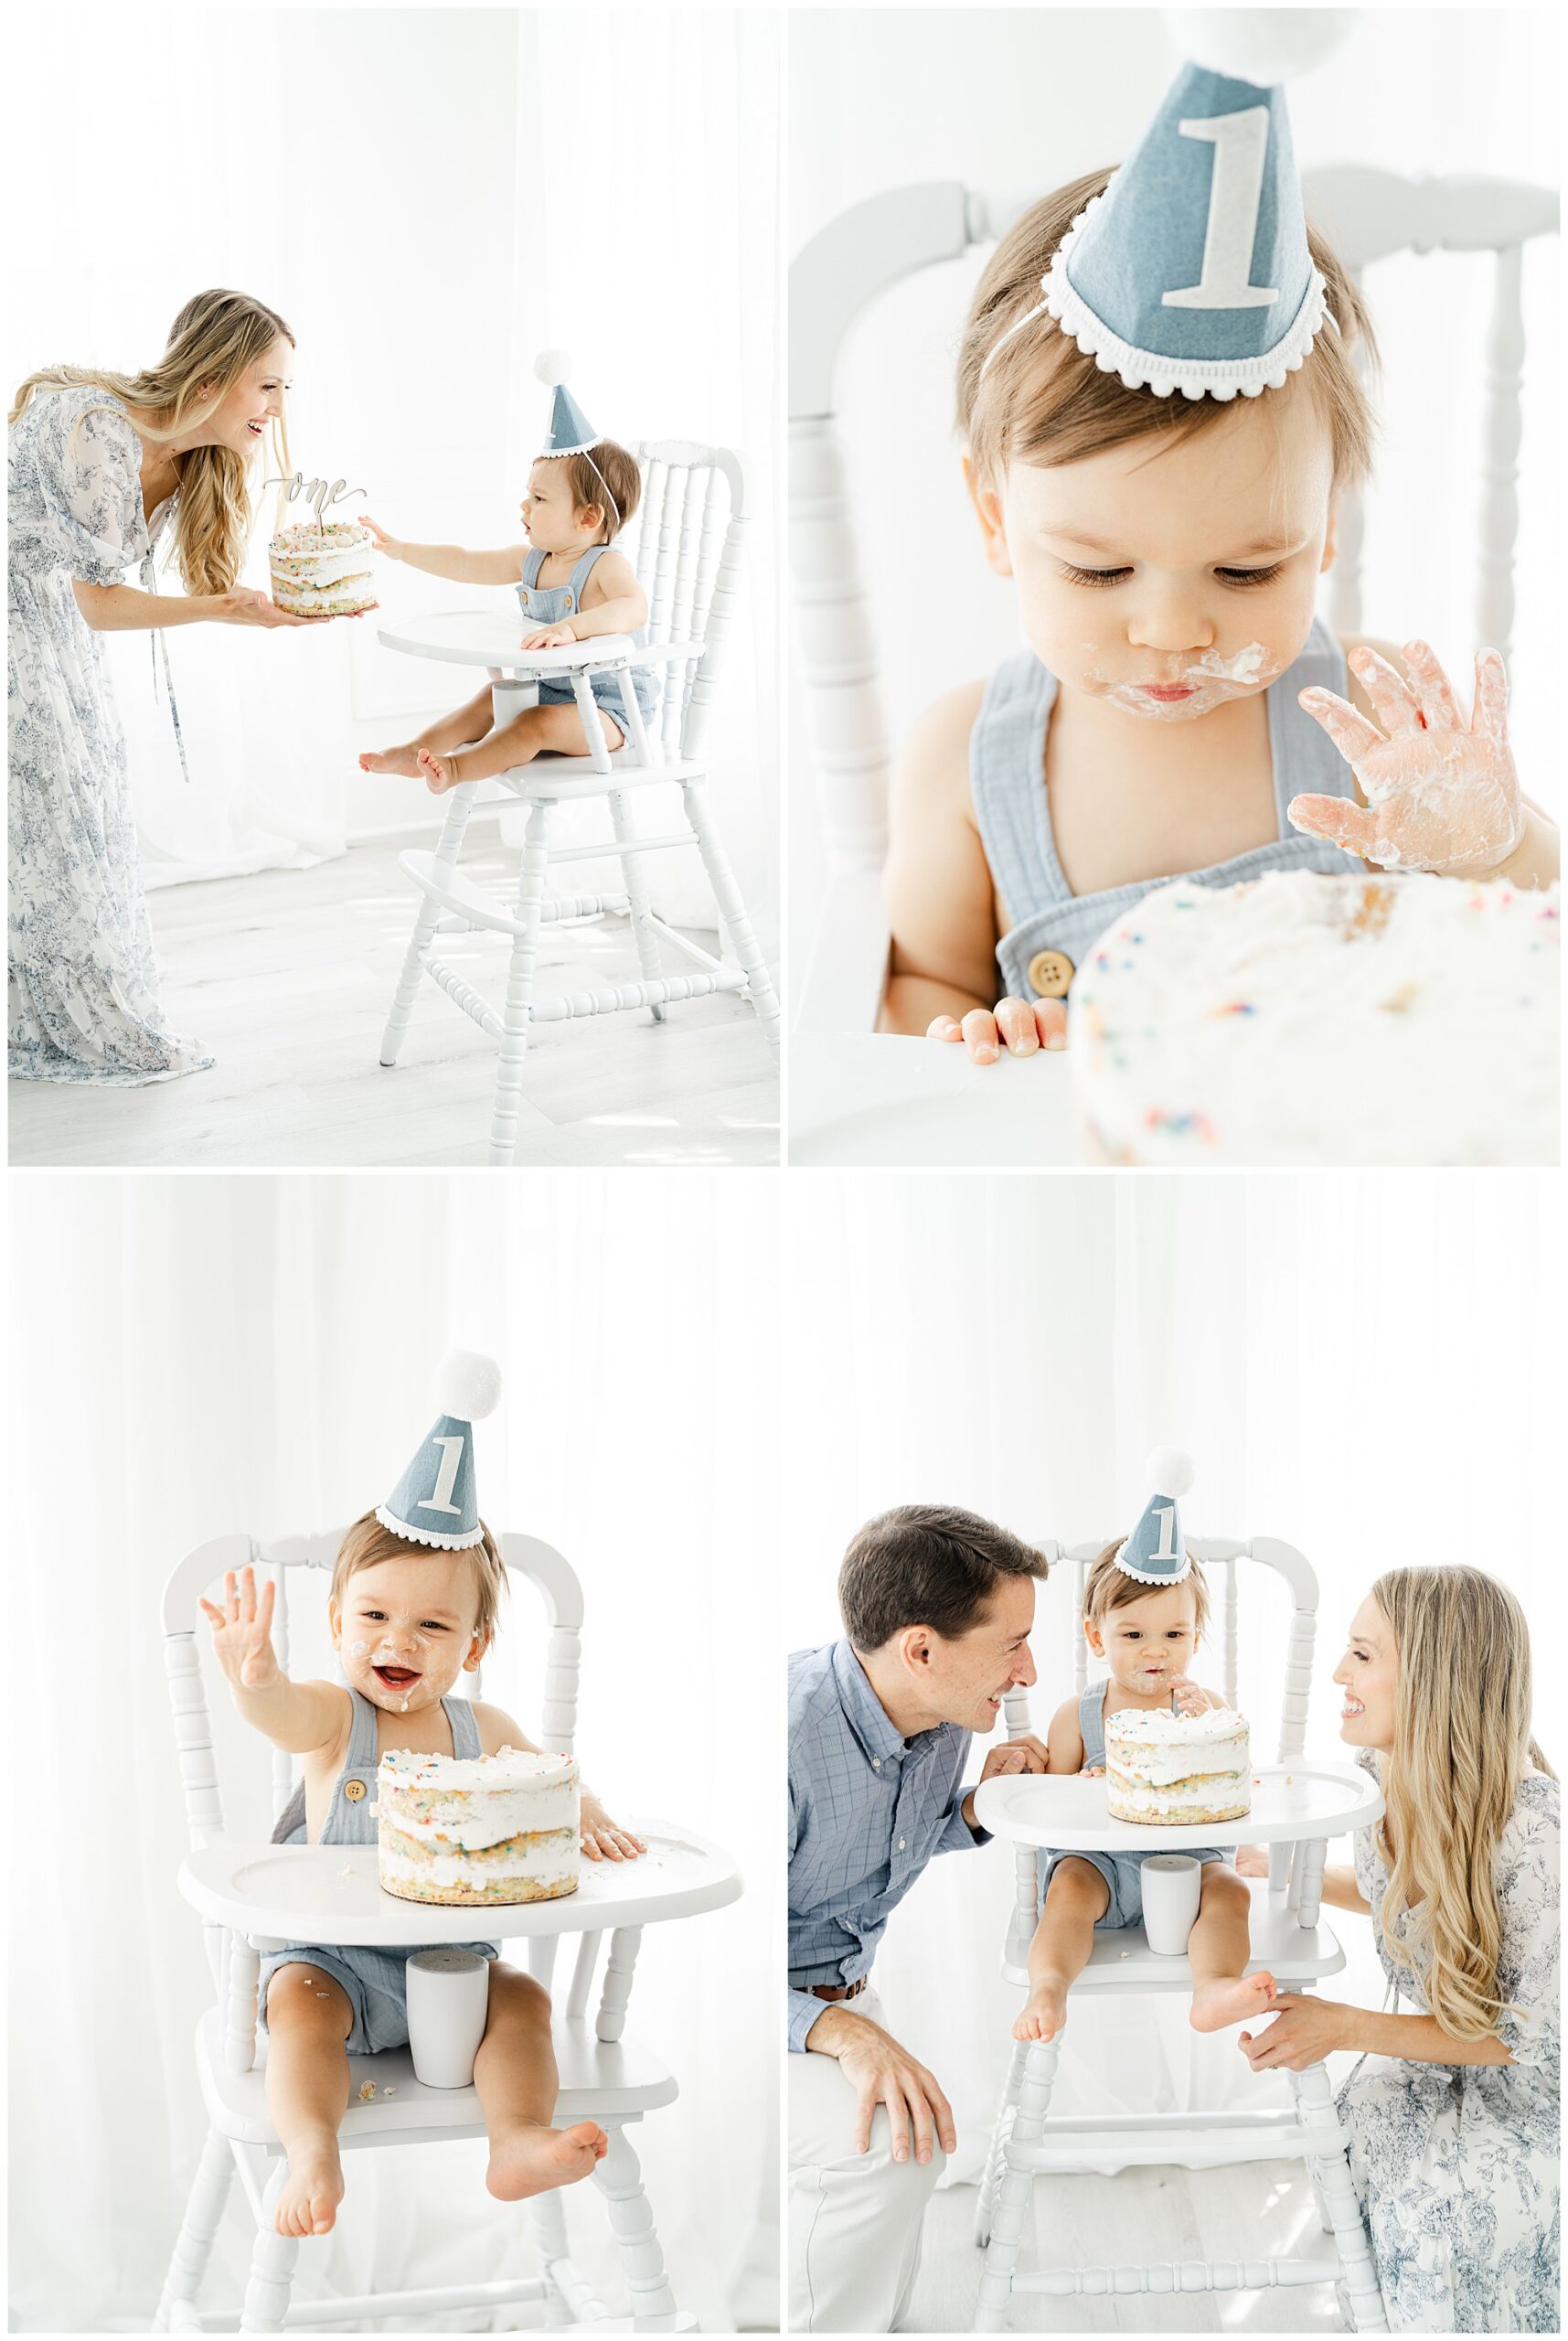 Four images showing portraits of a baby eating a white cake for his Atlanta cake smash photos.